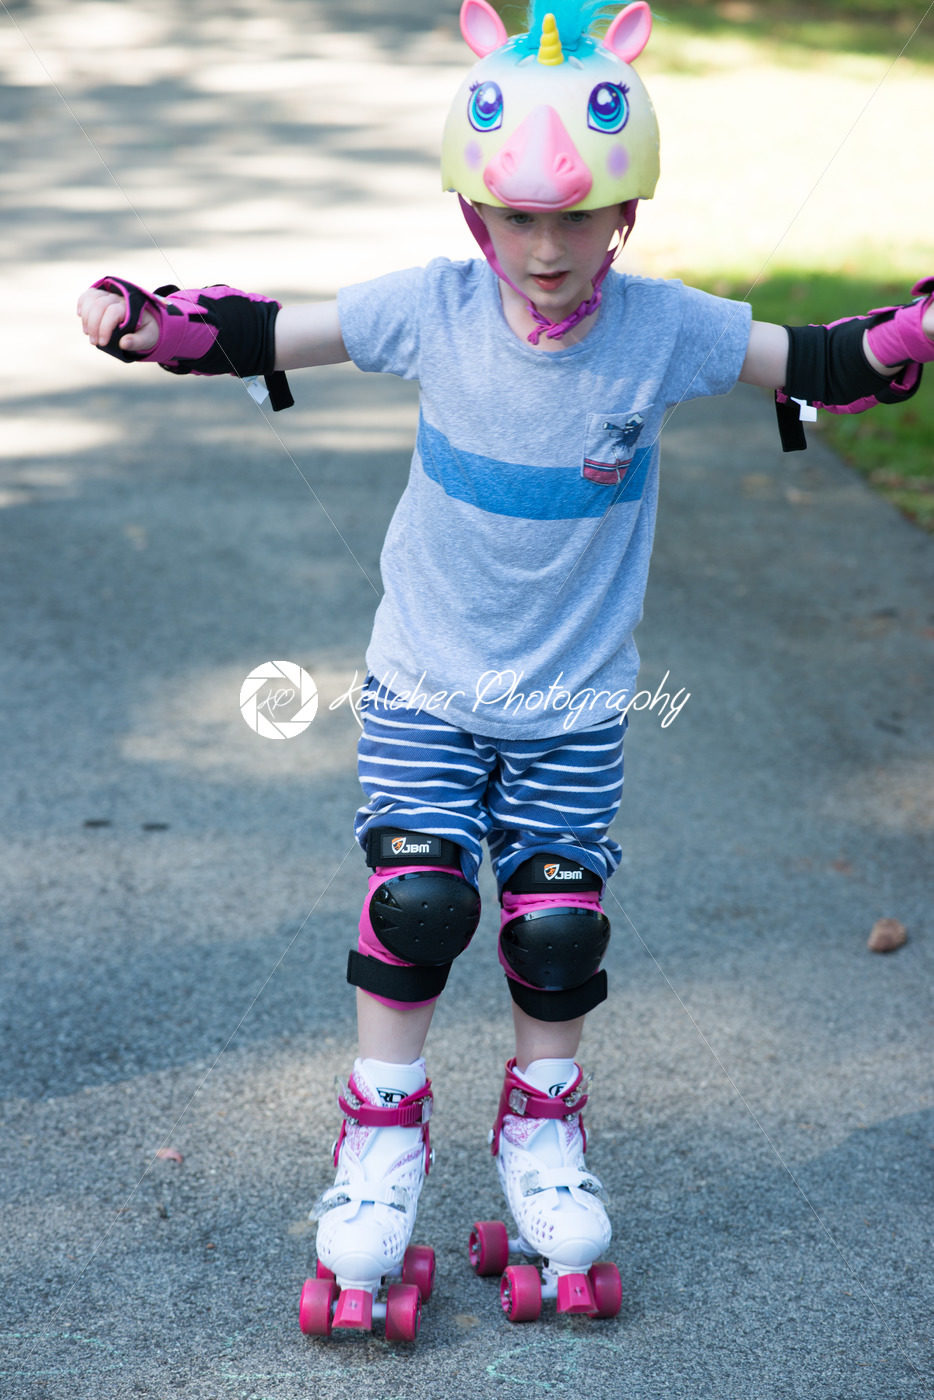 Young boy outside learning to riding on roller skates on driveway wearing protective helmet and elbow, wrist and knee pads - Kelleher Photography Store